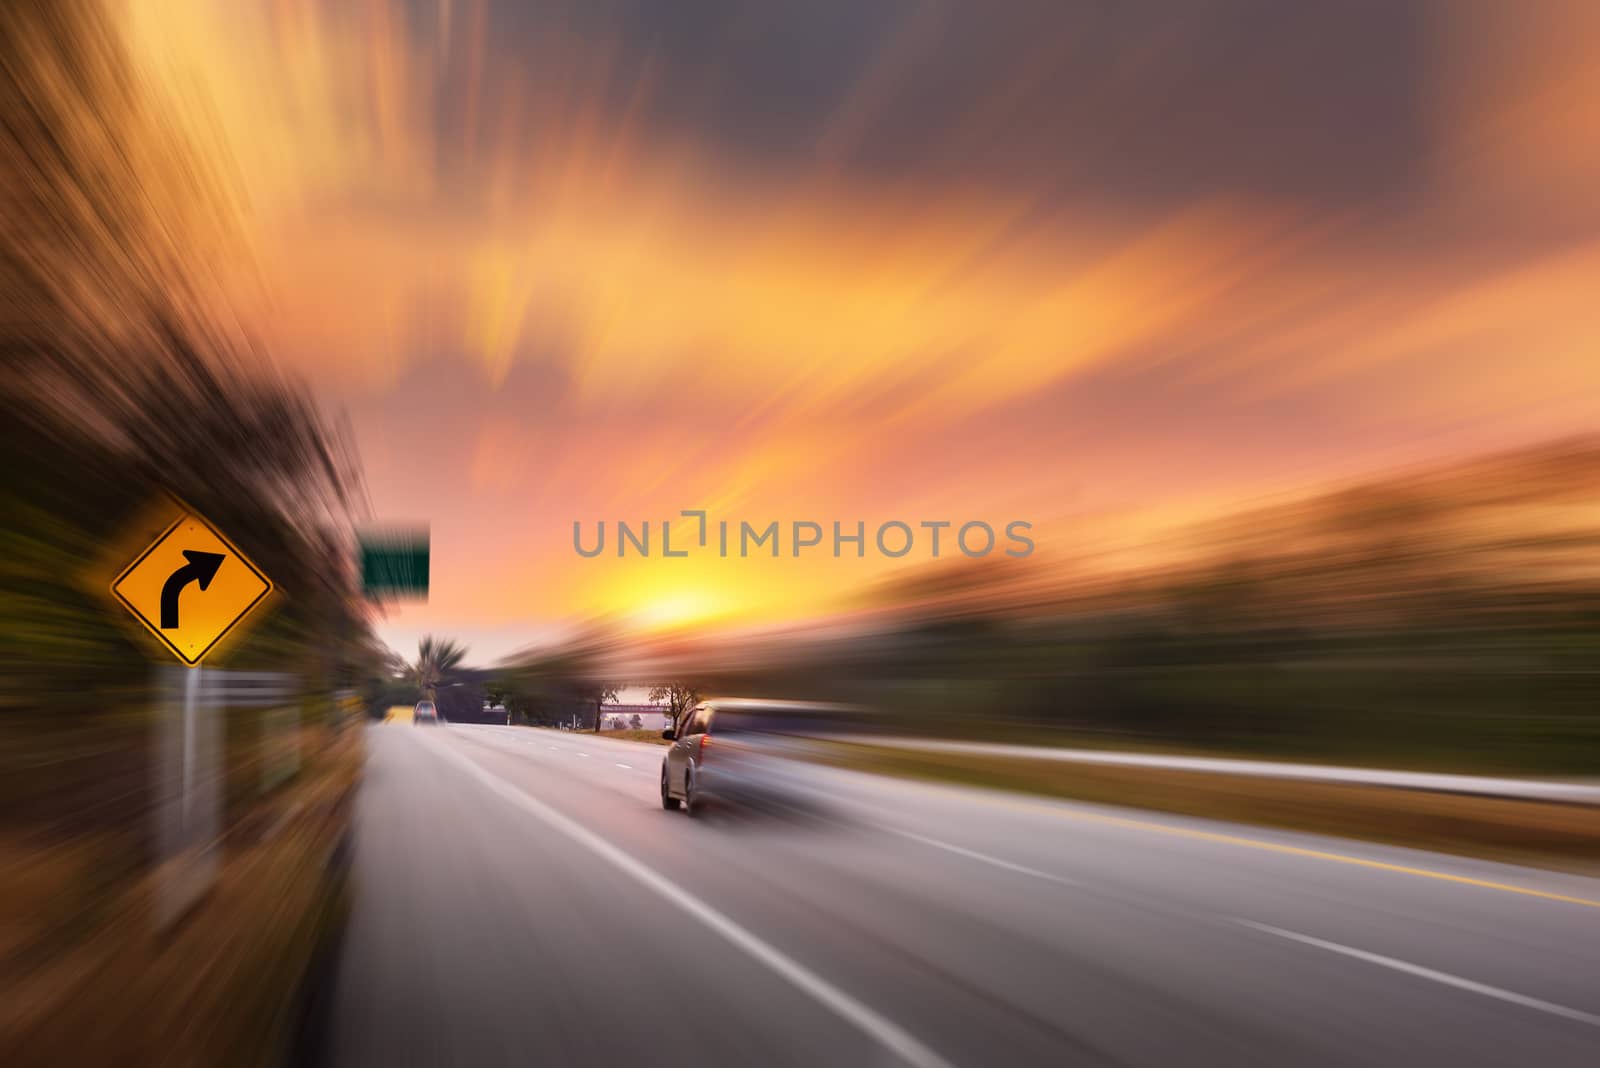 Motion Movement of Vehicle Car in Transportation Mode on Traffic Road, Motions Blur of Automotive While Speed Moving on Motorway During Sunset Scene. Transport Car Driving and Safety concept by MahaHeang245789